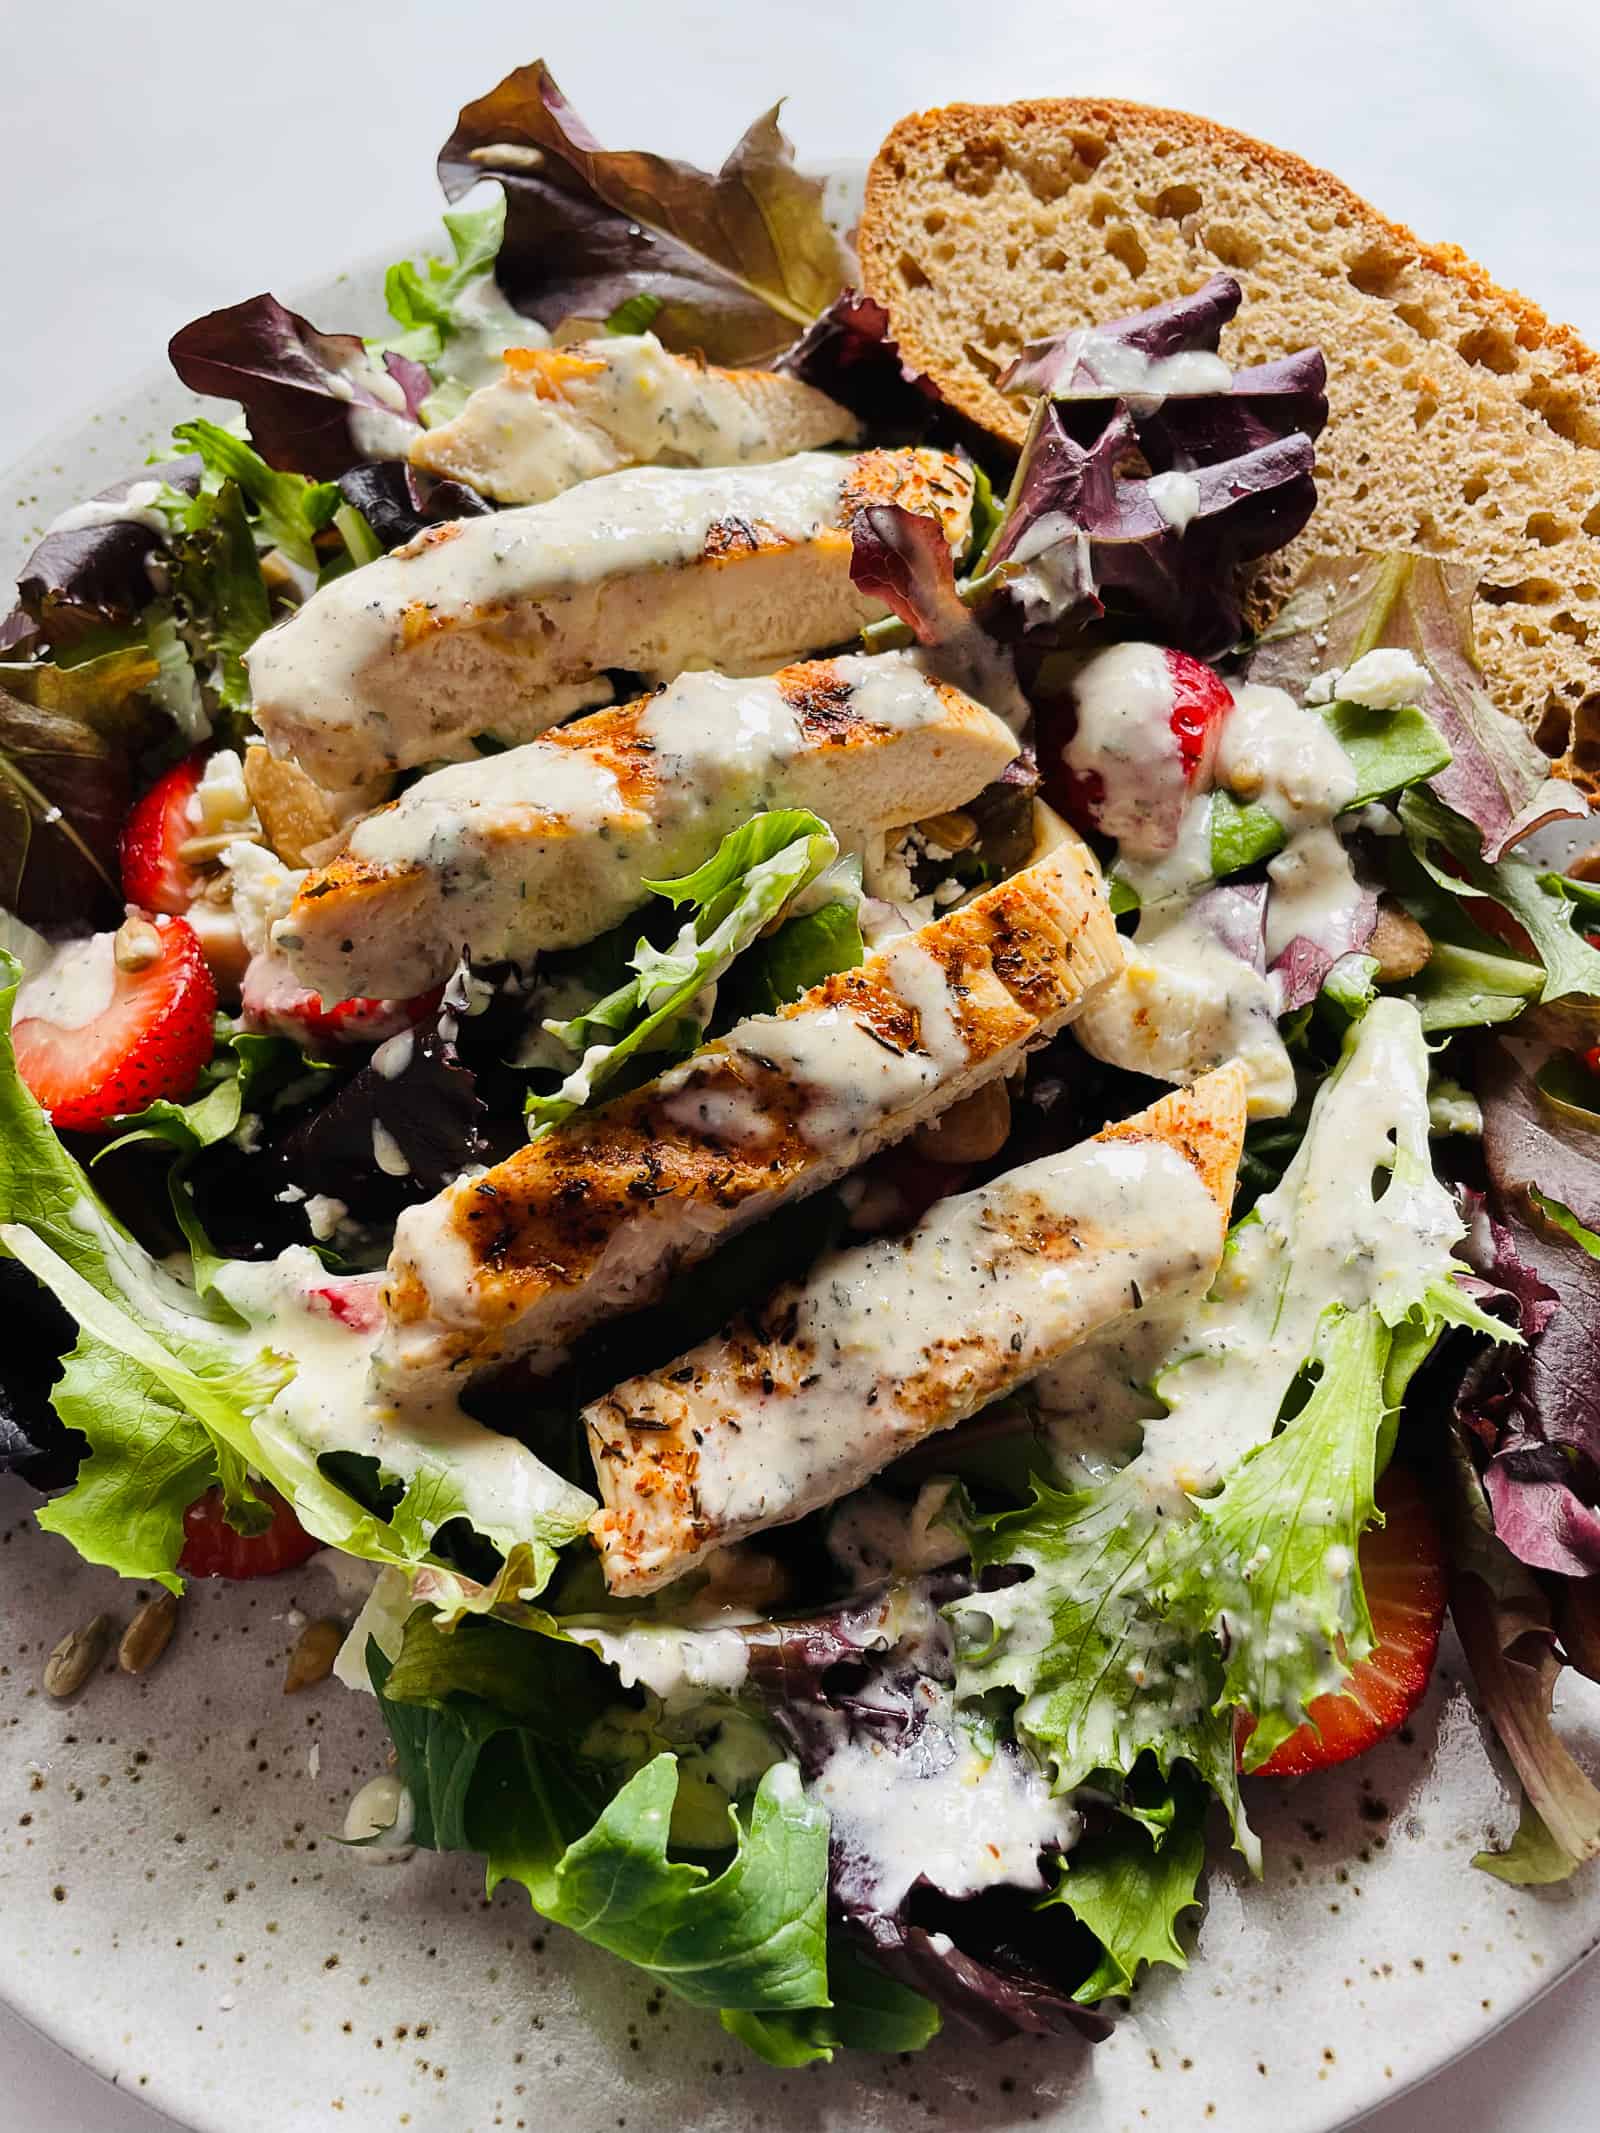 Creamy lemon pepper dressing on a green salad with chicken pieces.